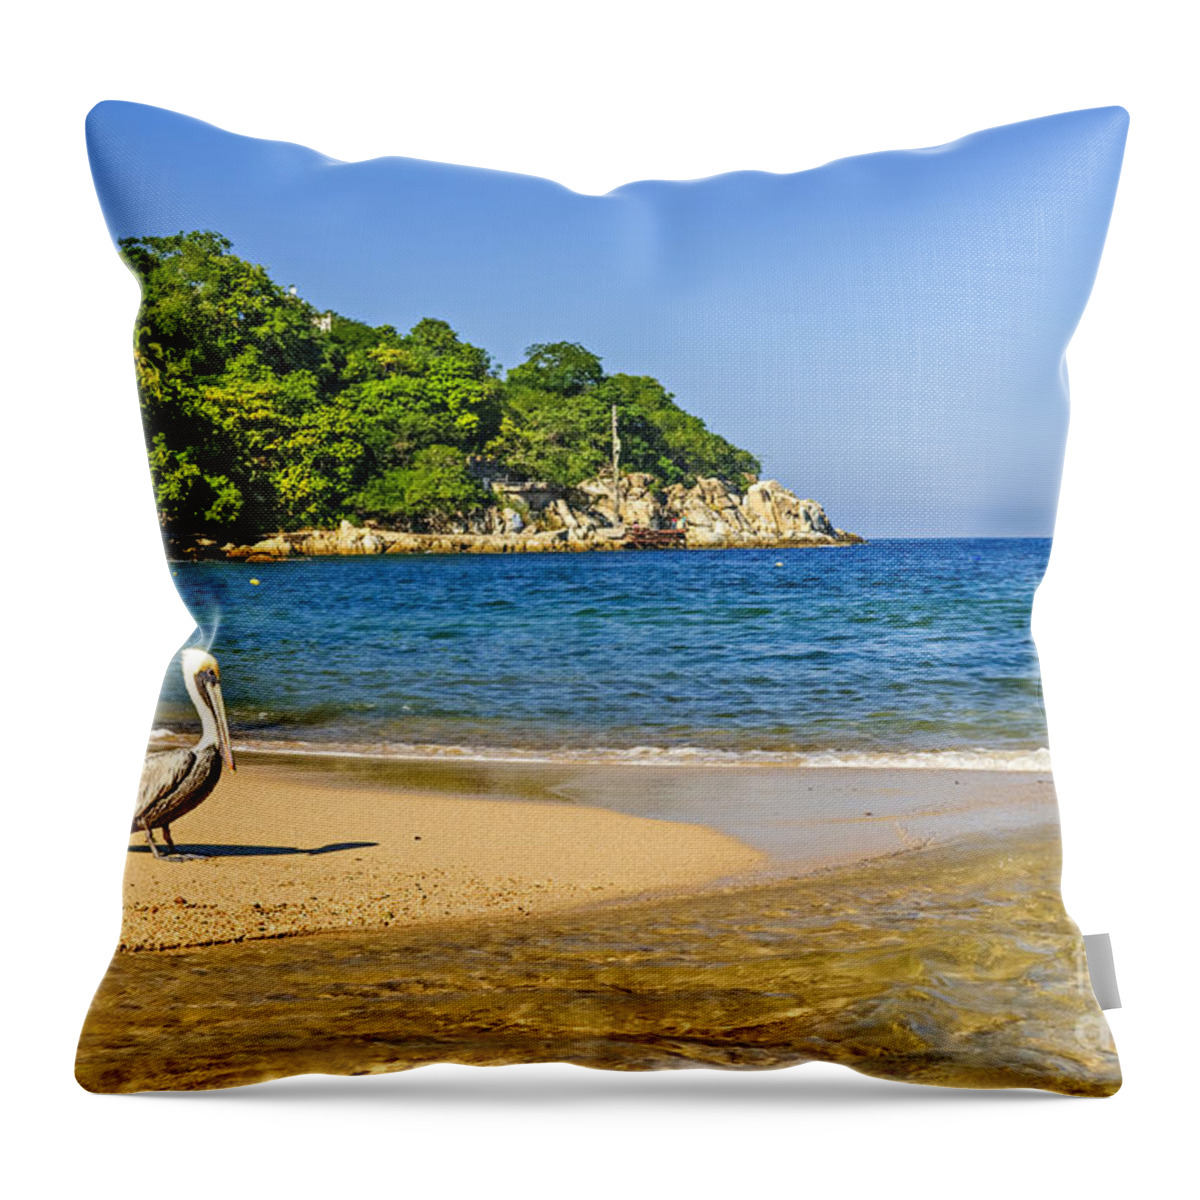 Pelican Throw Pillow featuring the photograph Pelican on beach by Elena Elisseeva